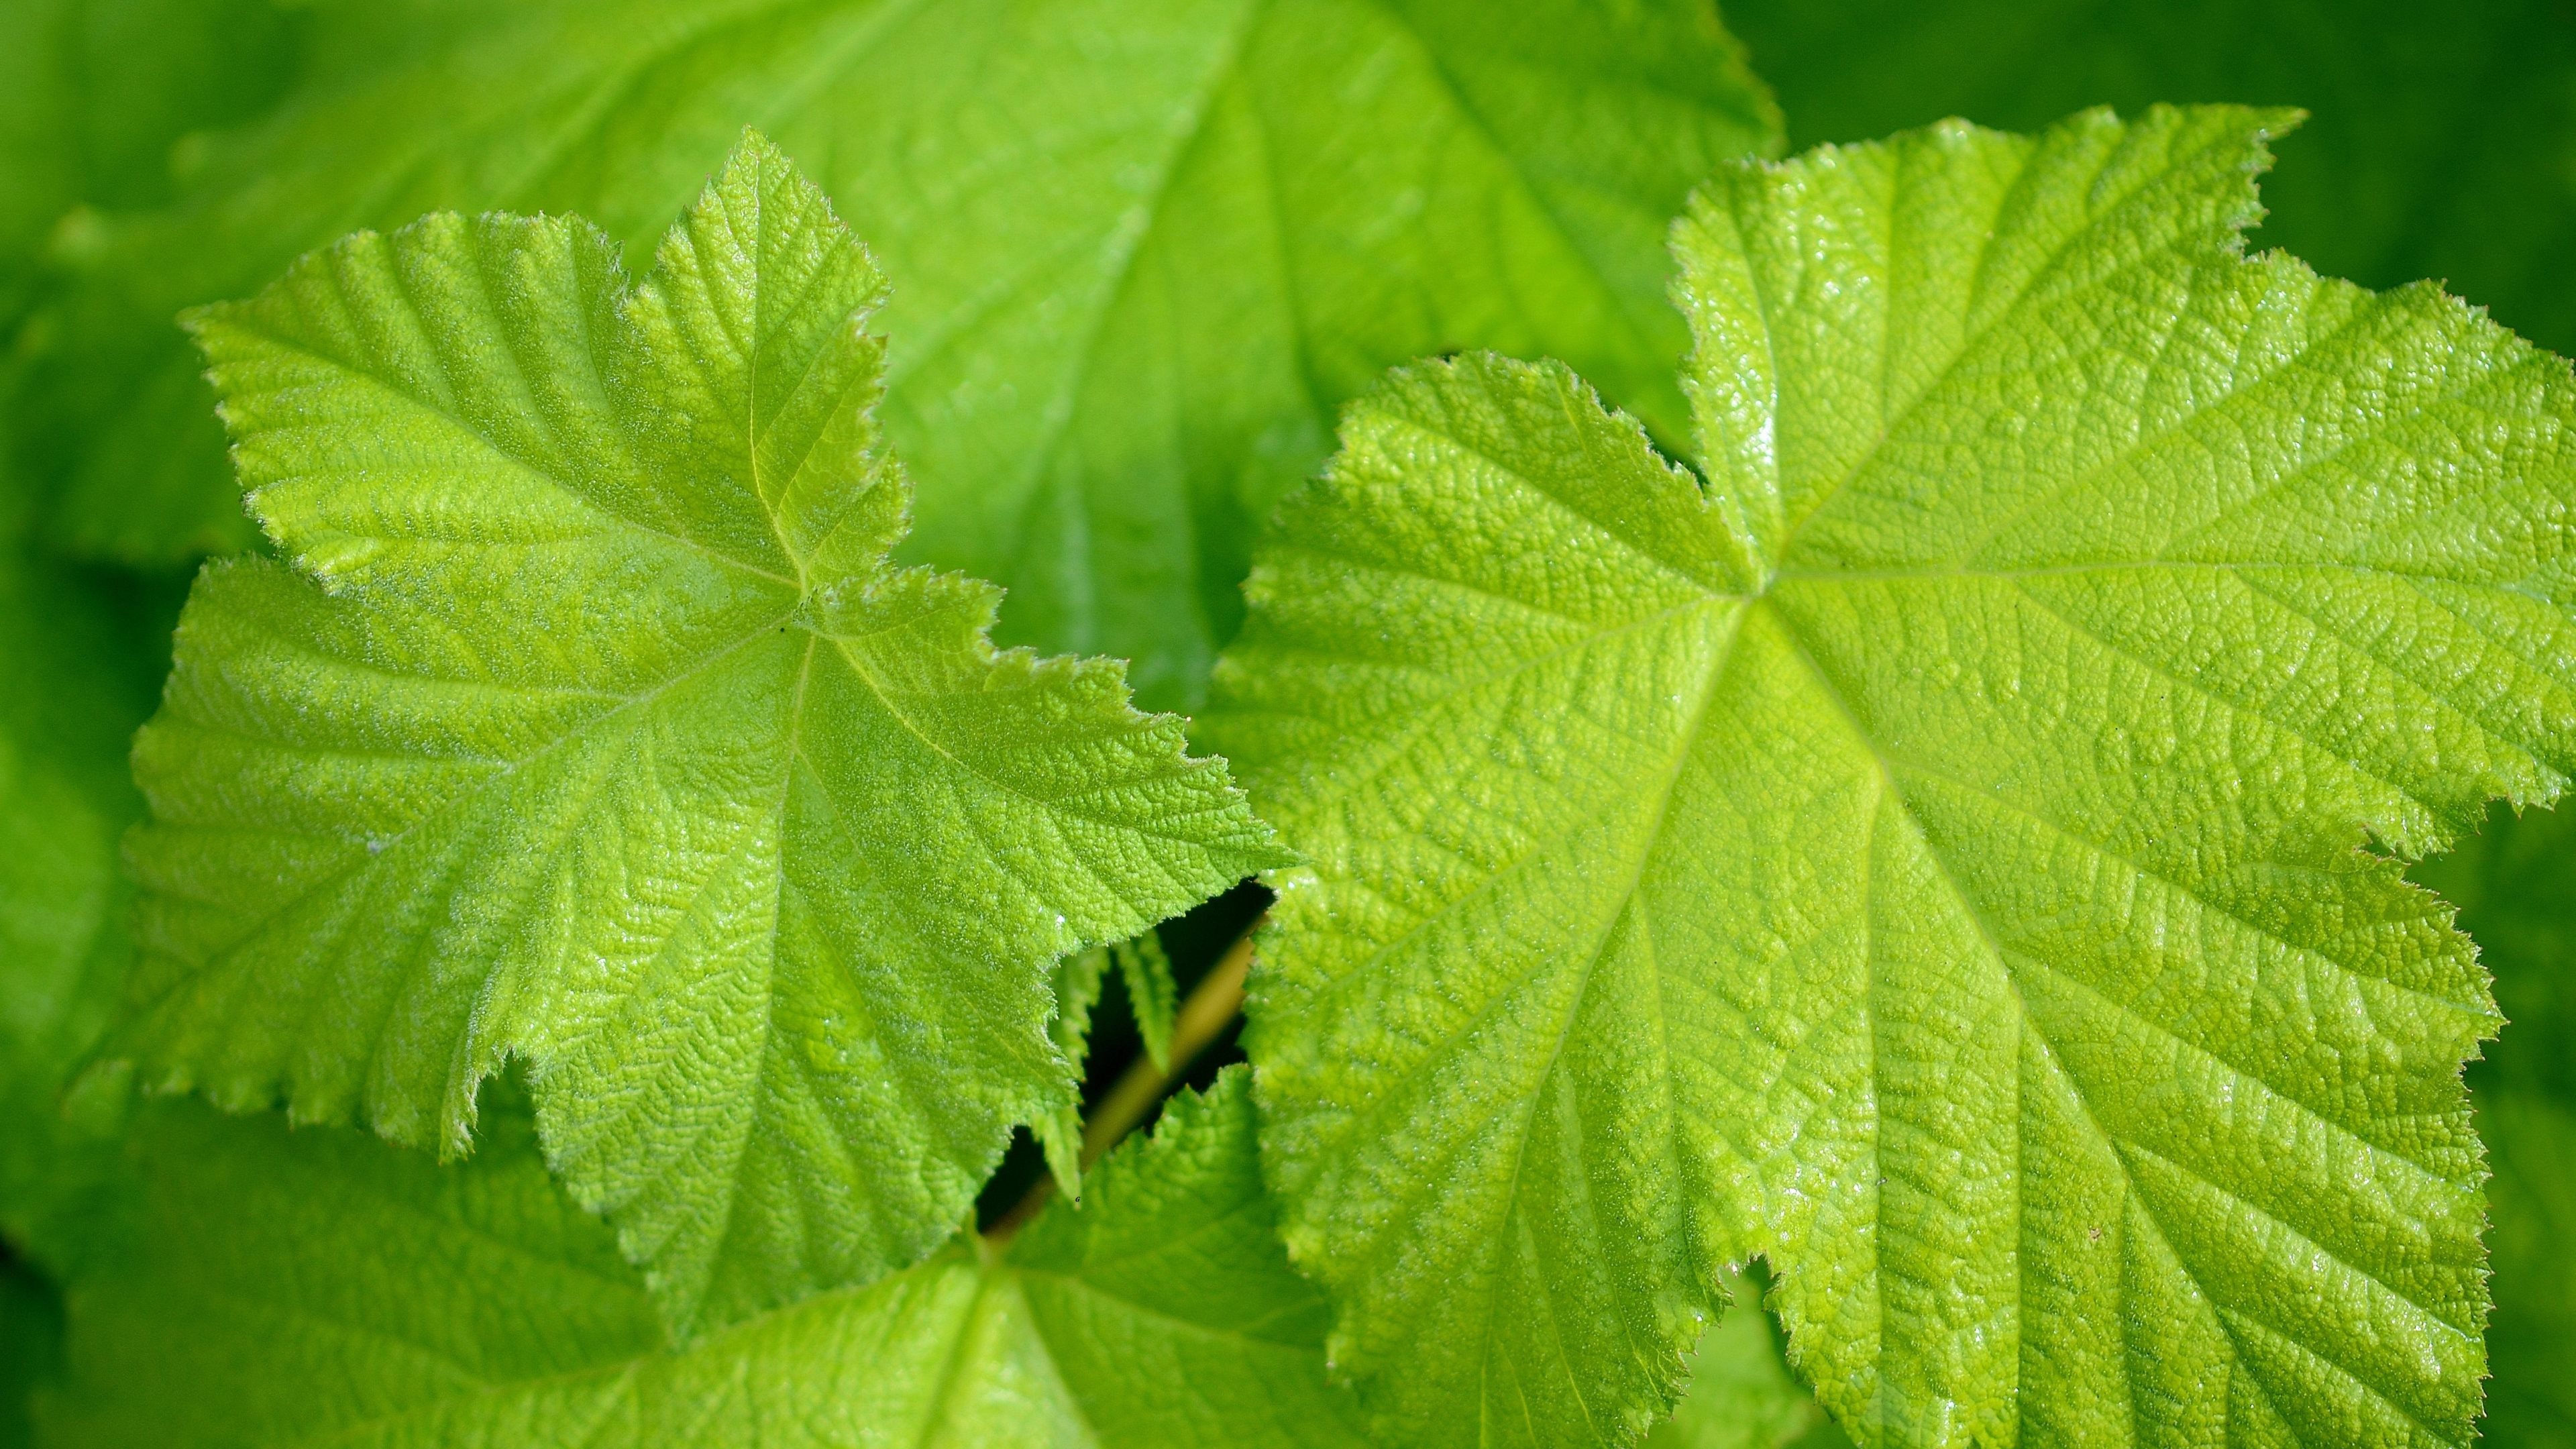 Photography That Have In The Spotlight A Casual Natural Green Leaf